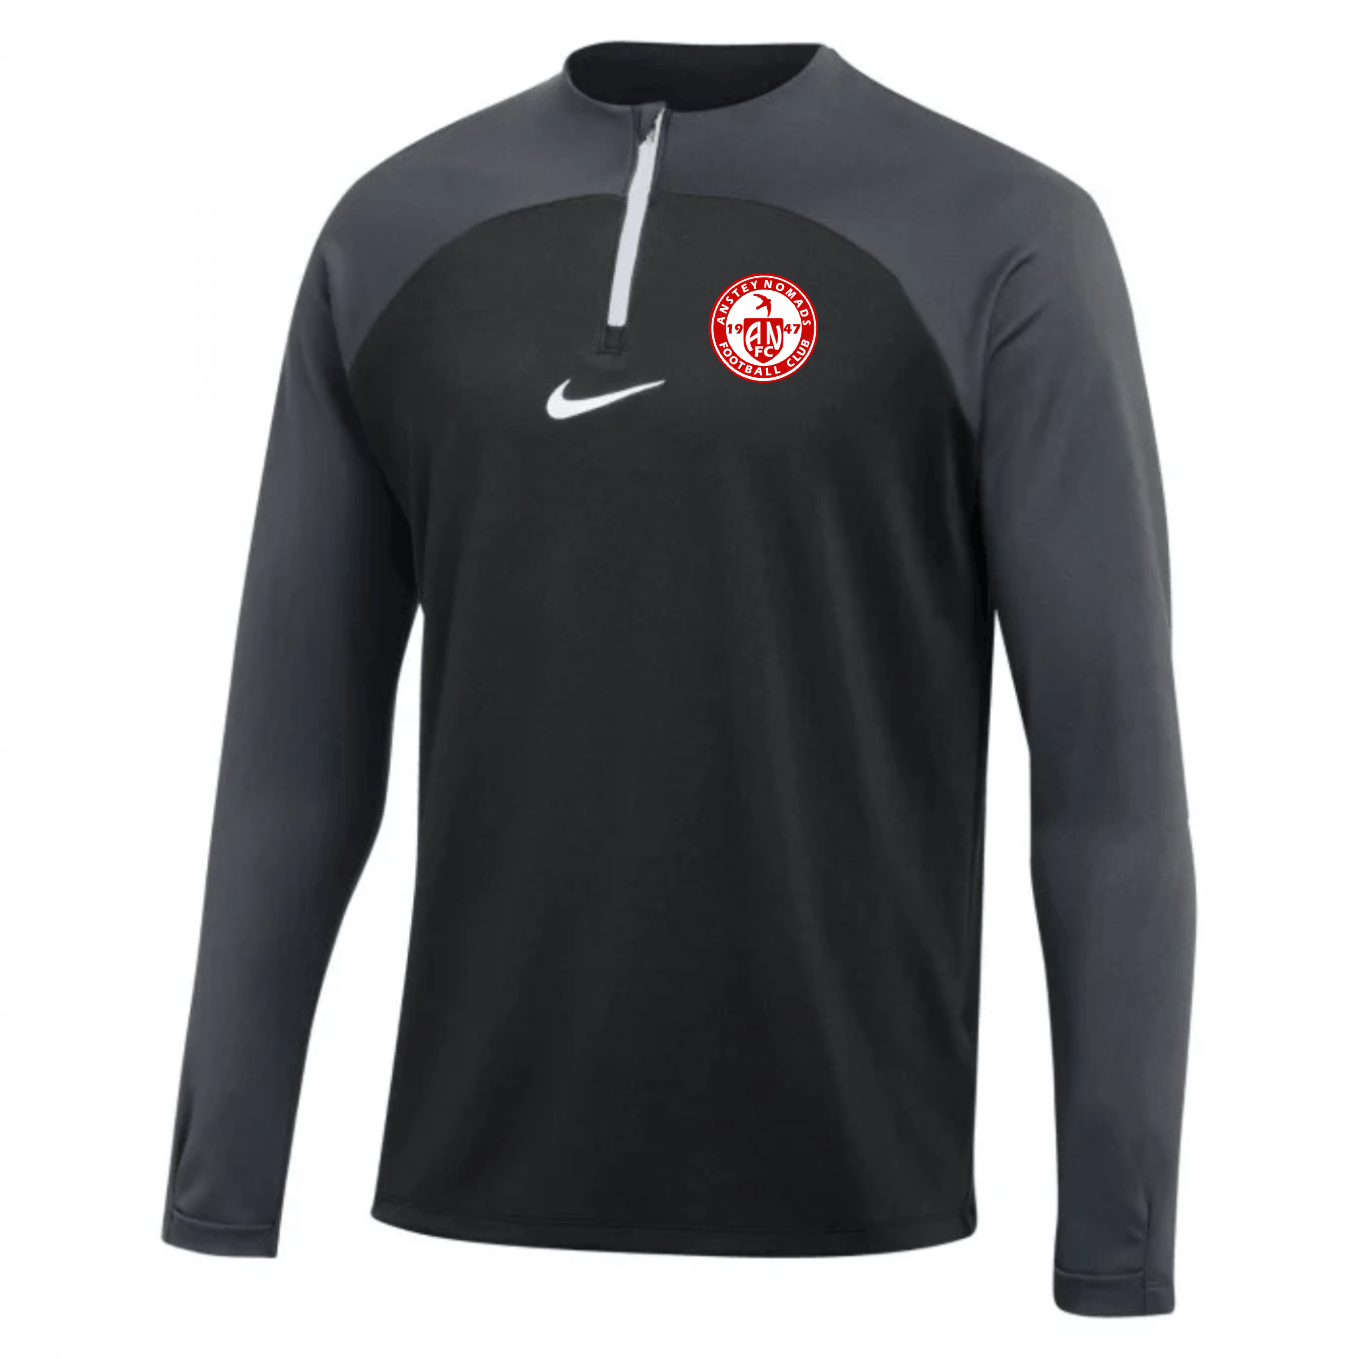 Anstey Nomads - Academy Pro Drill Top